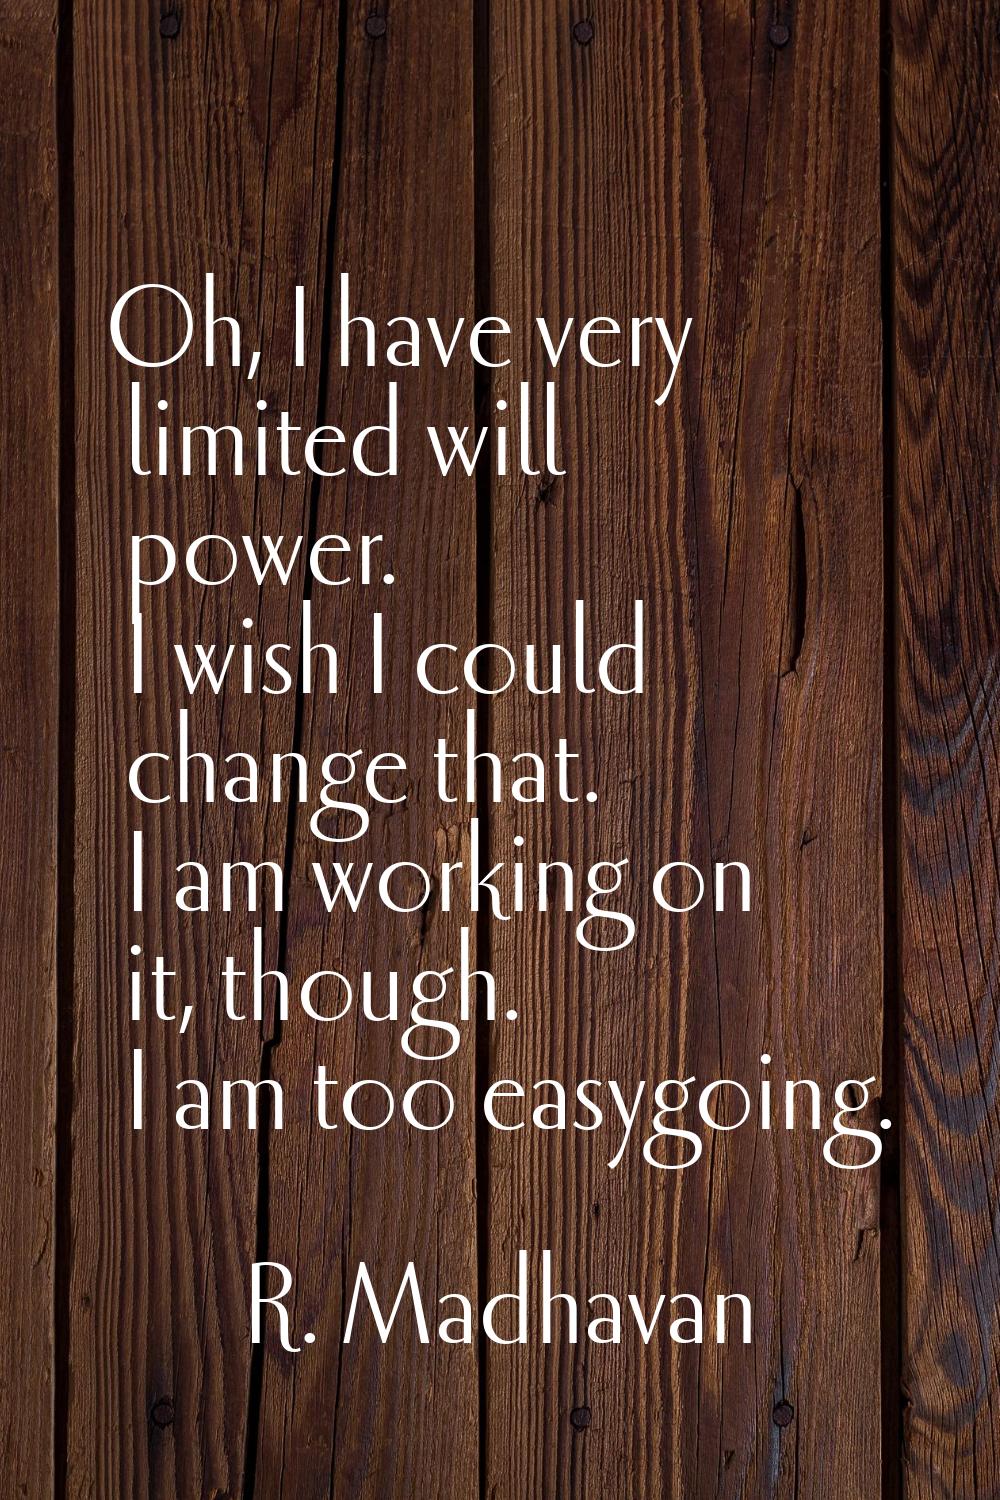 Oh, I have very limited will power. I wish I could change that. I am working on it, though. I am to